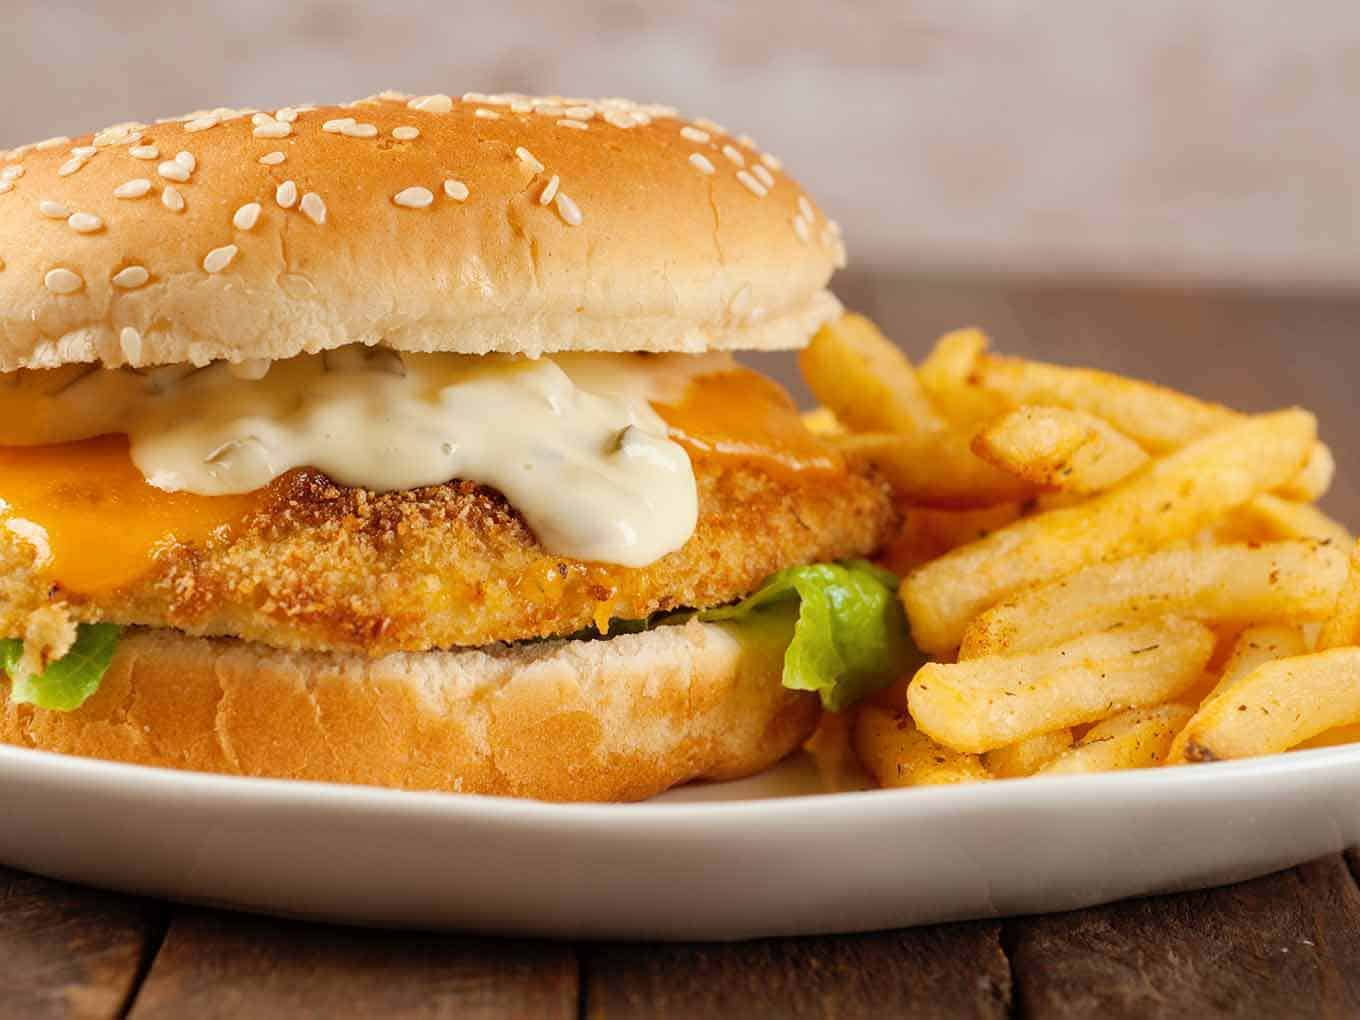 Fish Fillet Burger+Chips and Drink Combo